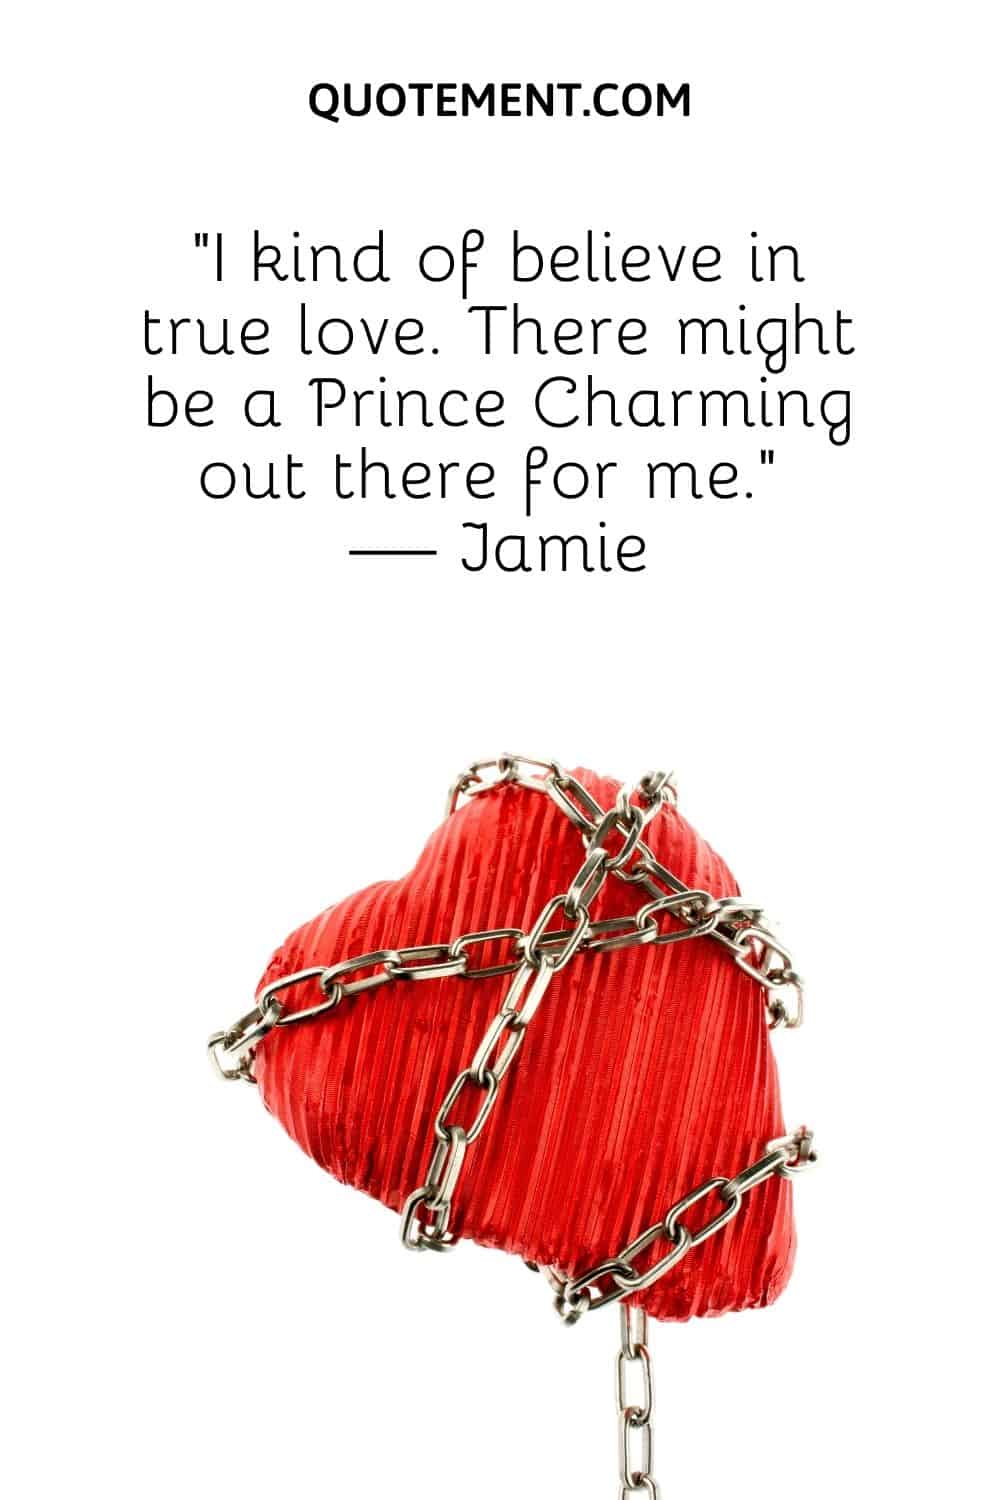 “I kind of believe in true love. There might be a Prince Charming out there for me.” — Jamie